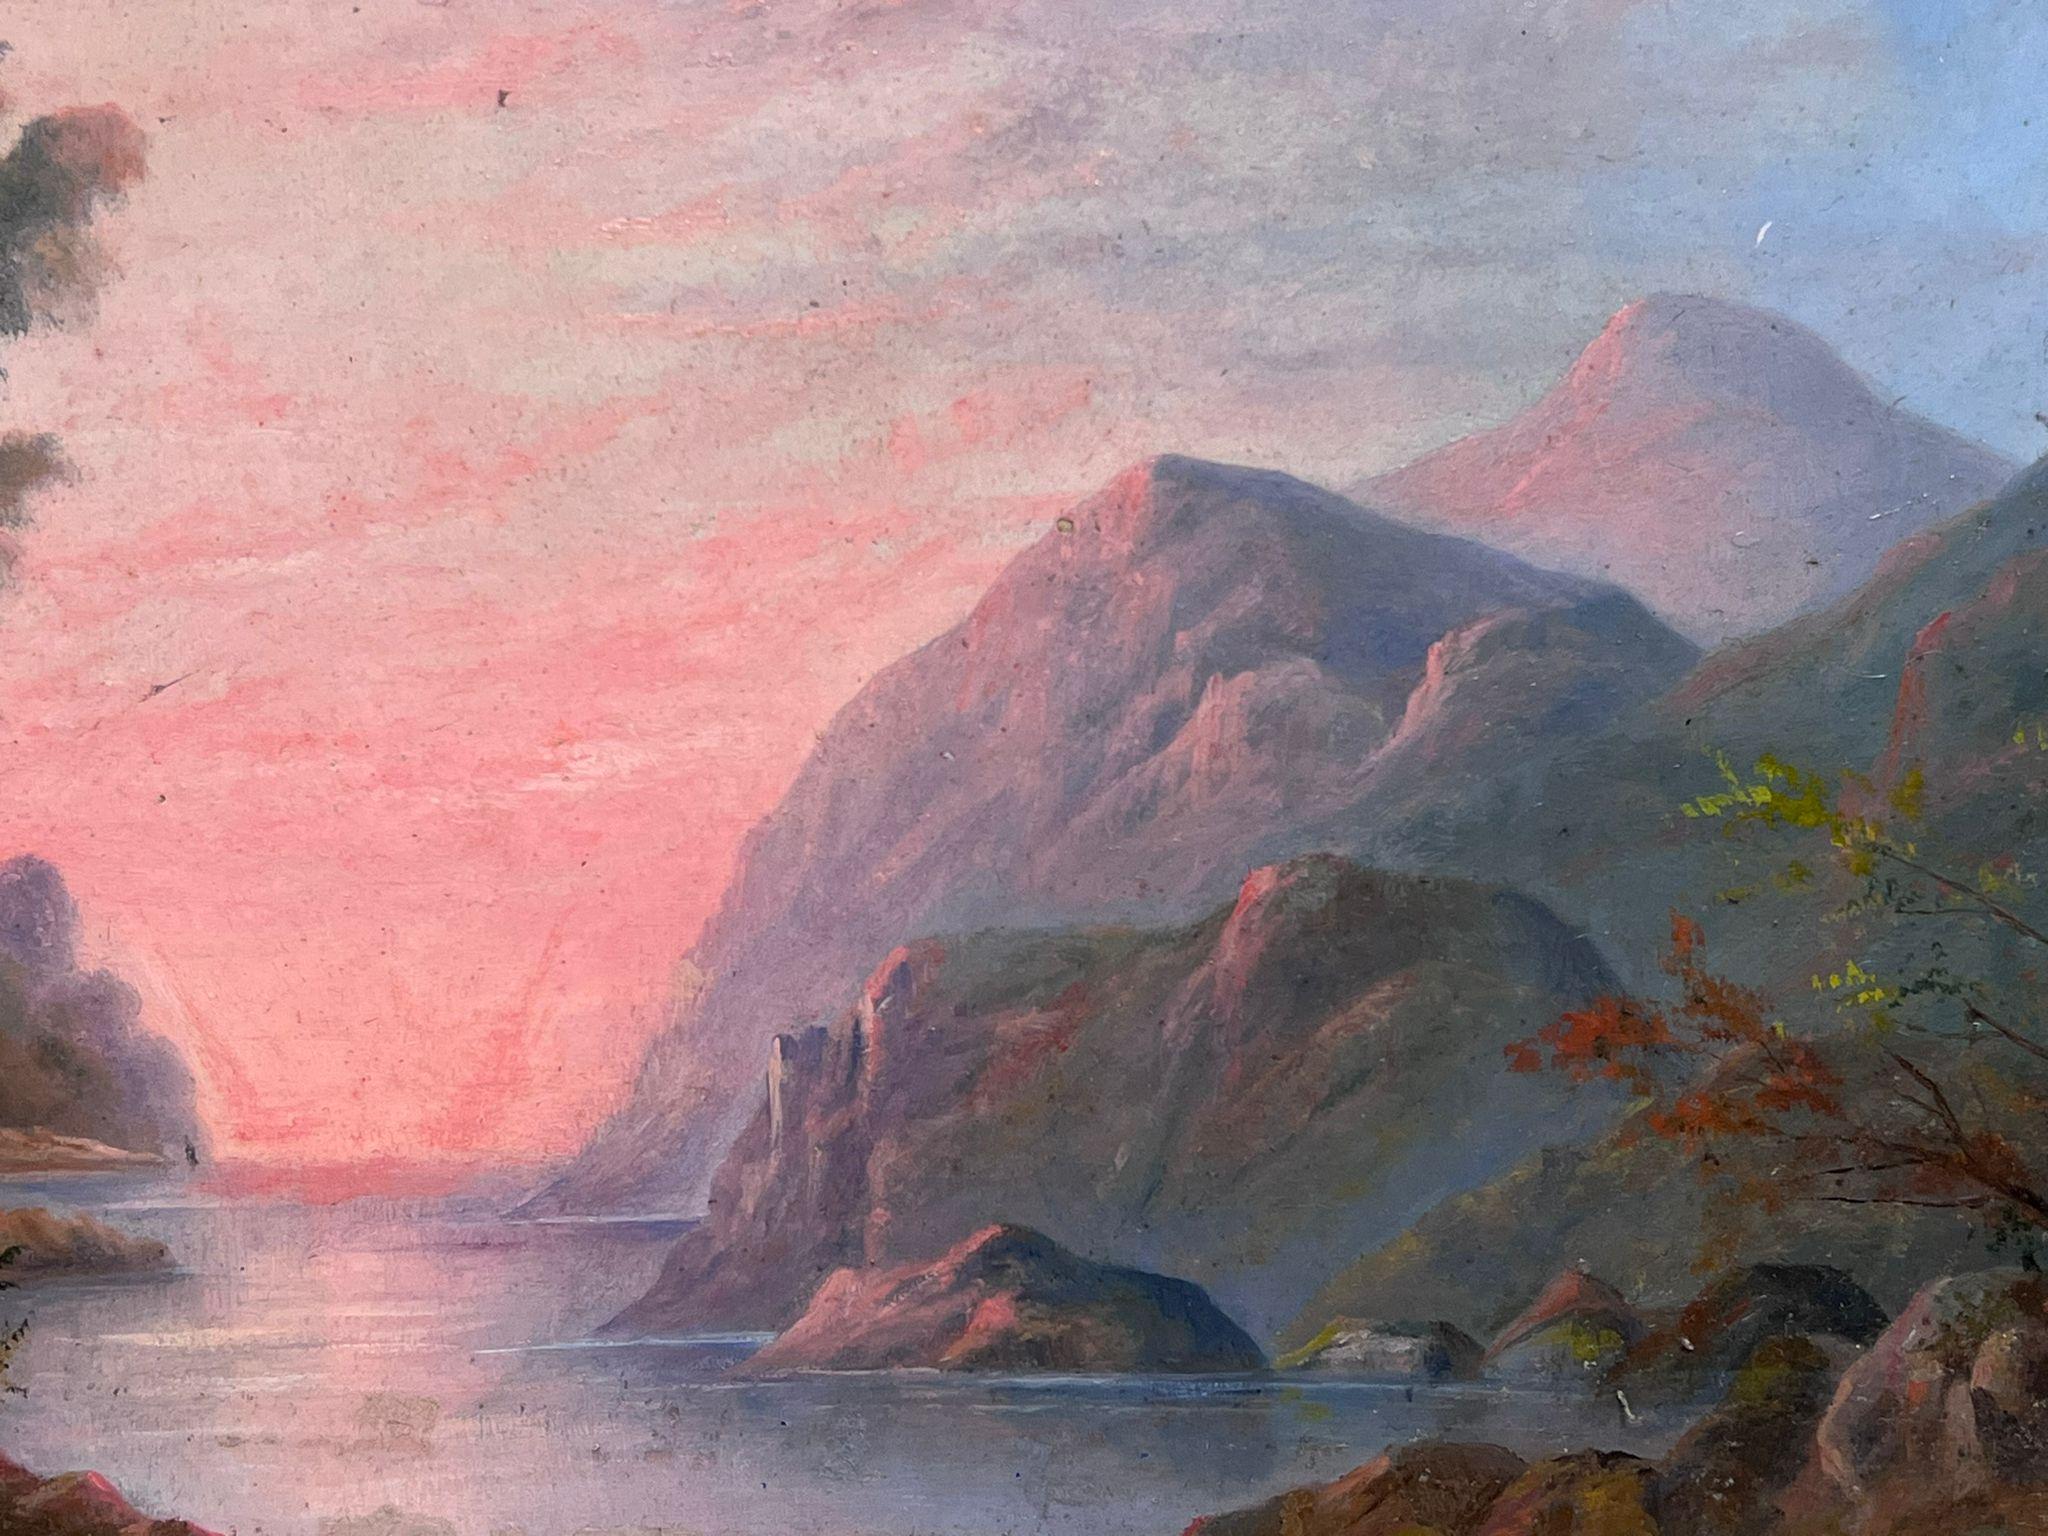 Sunset
English School, mid 19th century
oil on artists board, framed
framed: 10 x 14 inches
board: 8 x 12 inches
provenance: private collection, UK
condition: very good and sound condition